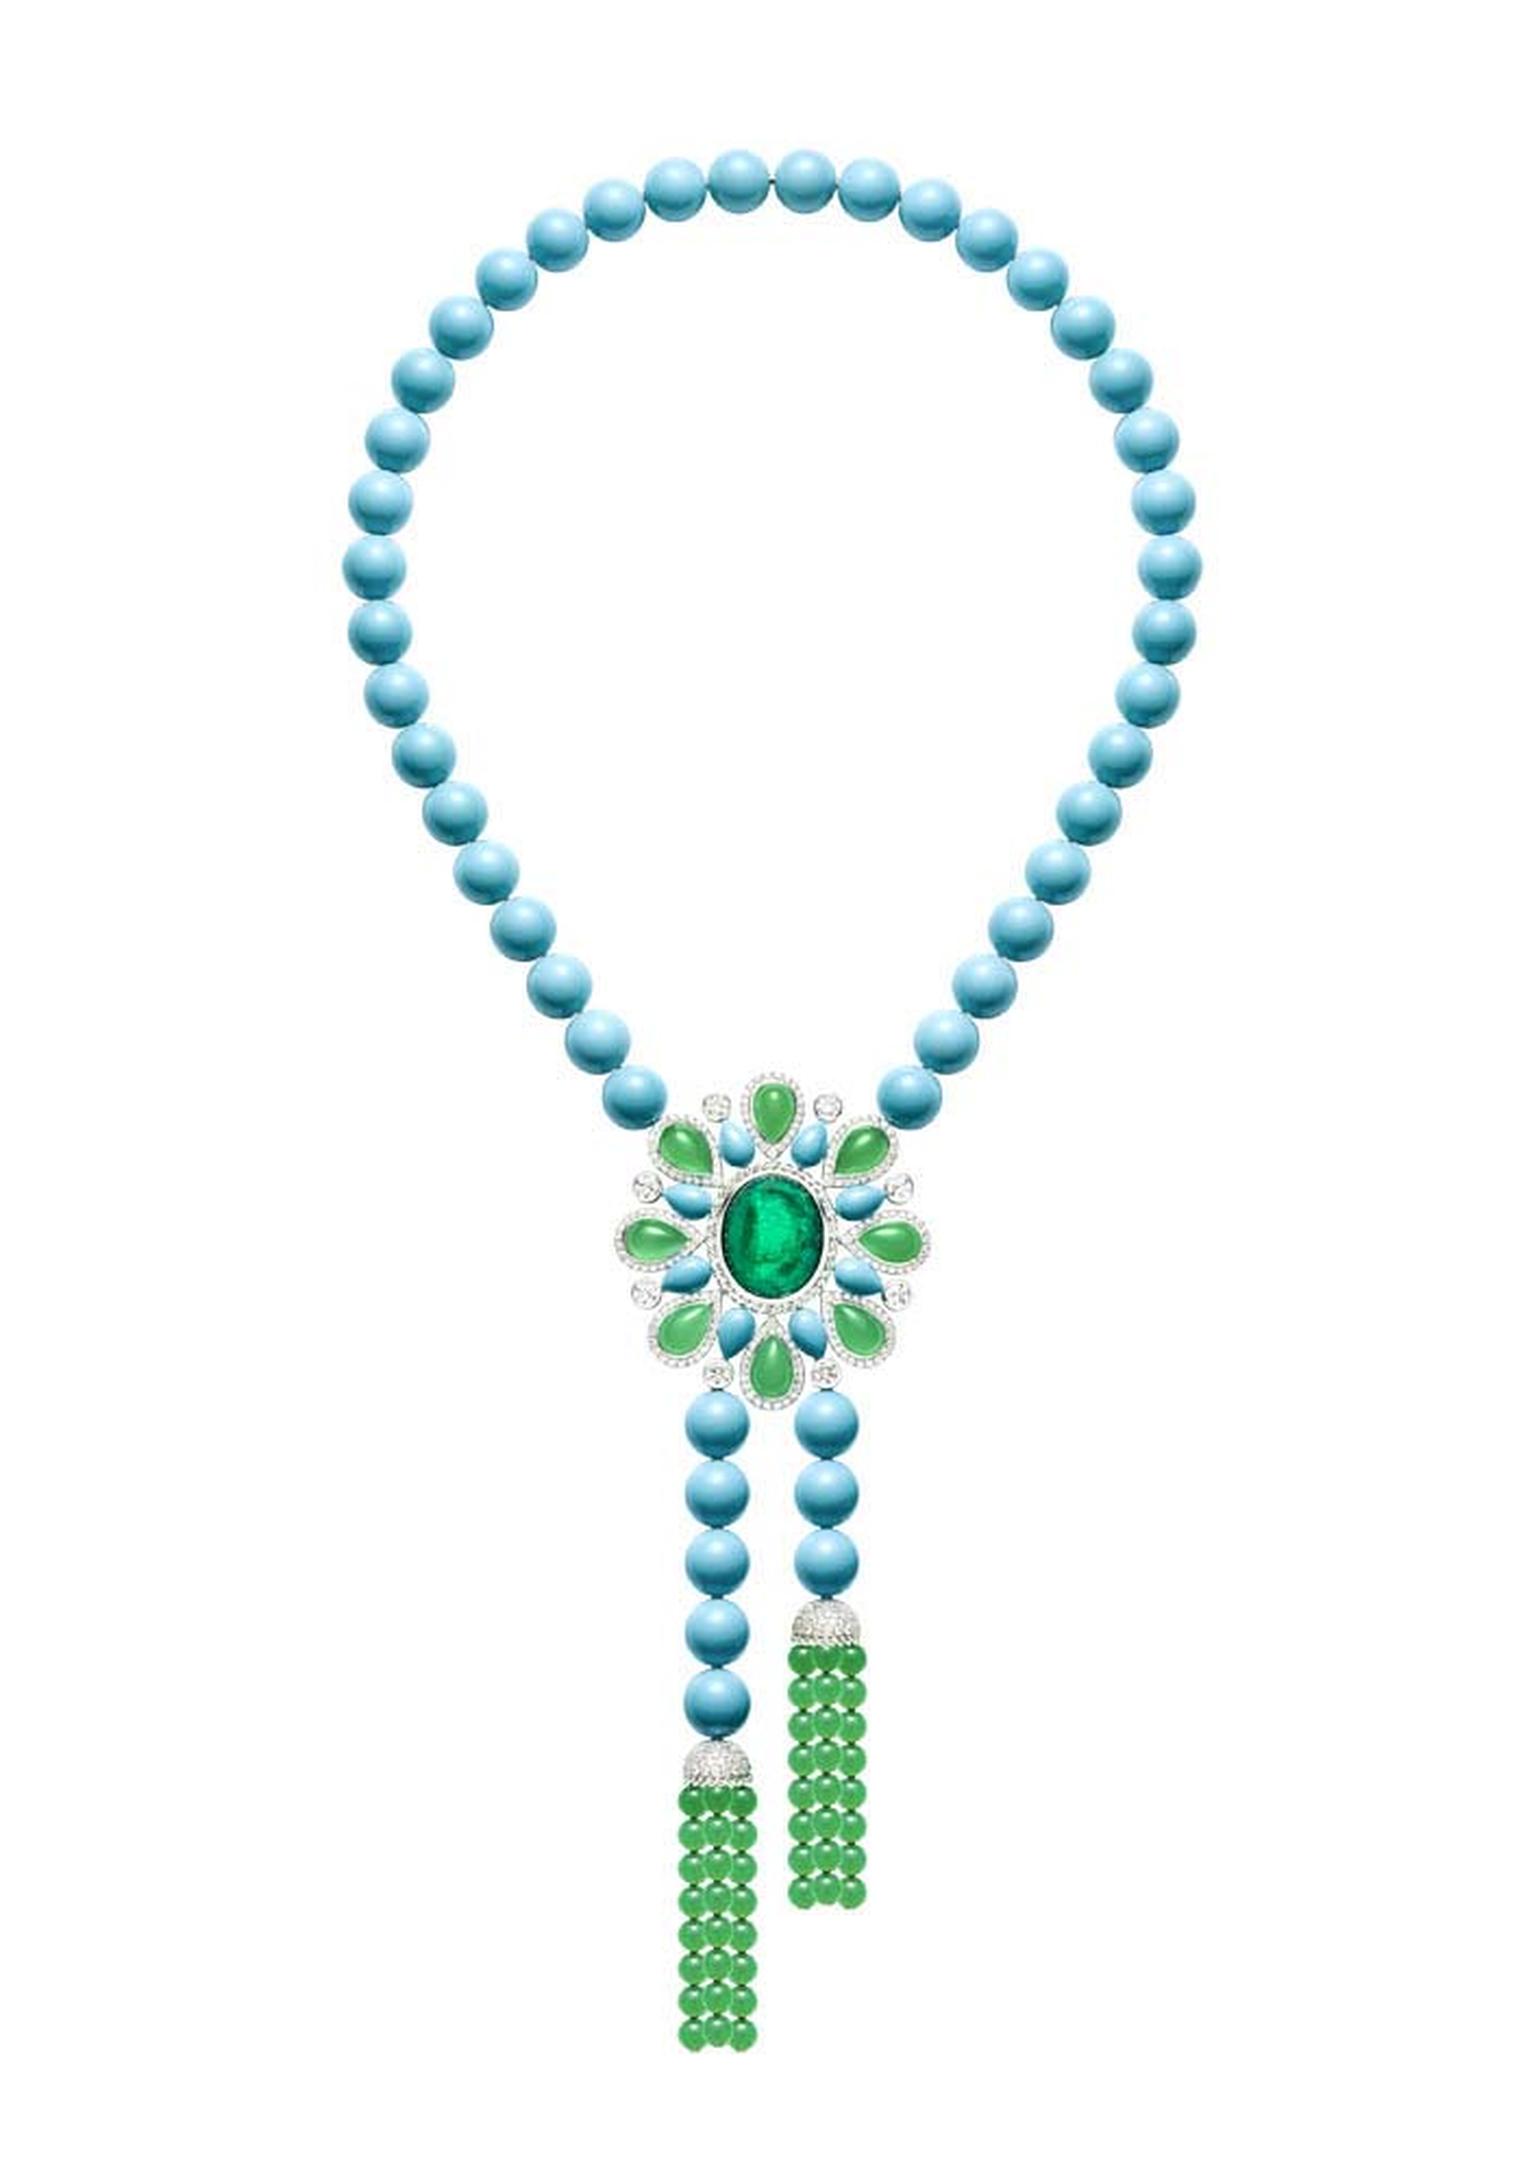 Extremely Piaget collection necklace in white gold set with 301ct turquoise beads, 42ct chrysoprase beads, a 23.14ct emerald cabochon, pear-shaped chrysoprases and turquoises and brilliant-cut diamonds.